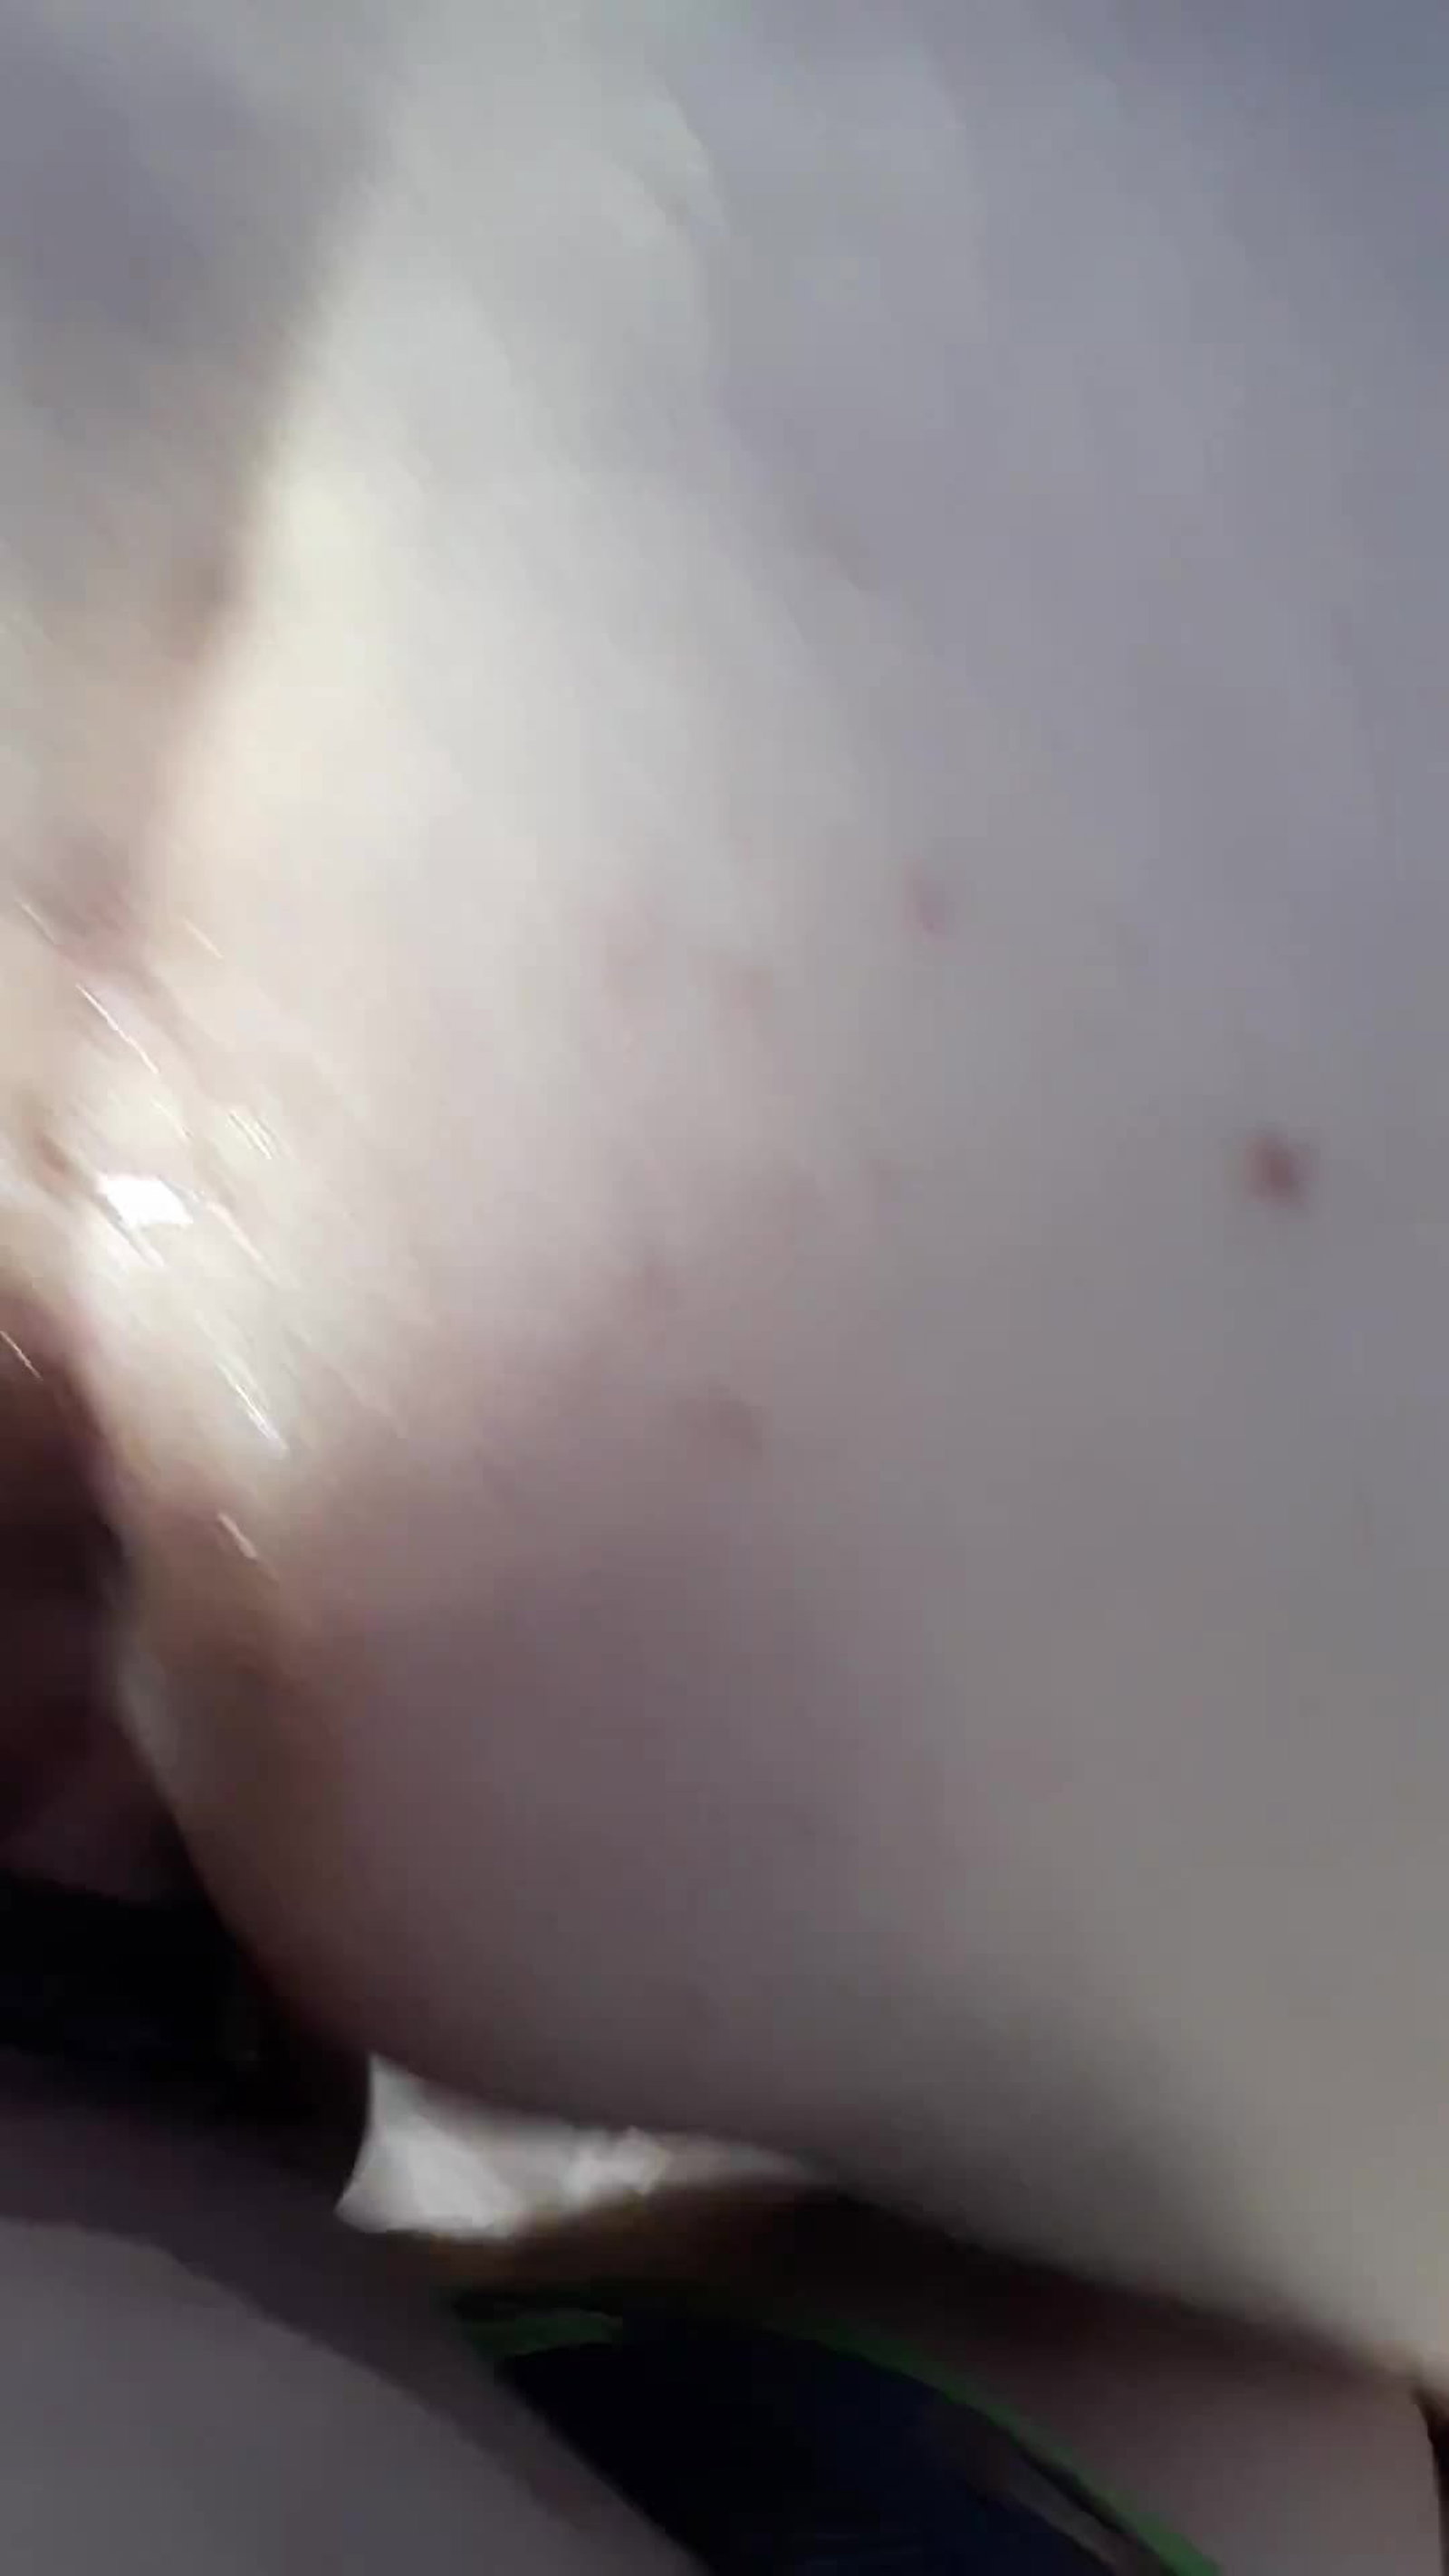 Video by Deviant Destructions with the username @deviantdestructions, who is a verified user,  April 9, 2021 at 1:21 PM. The post is about the topic Real Incest and the text says '#daddy/daughter #virginpussy #breeding #incest #taboo'